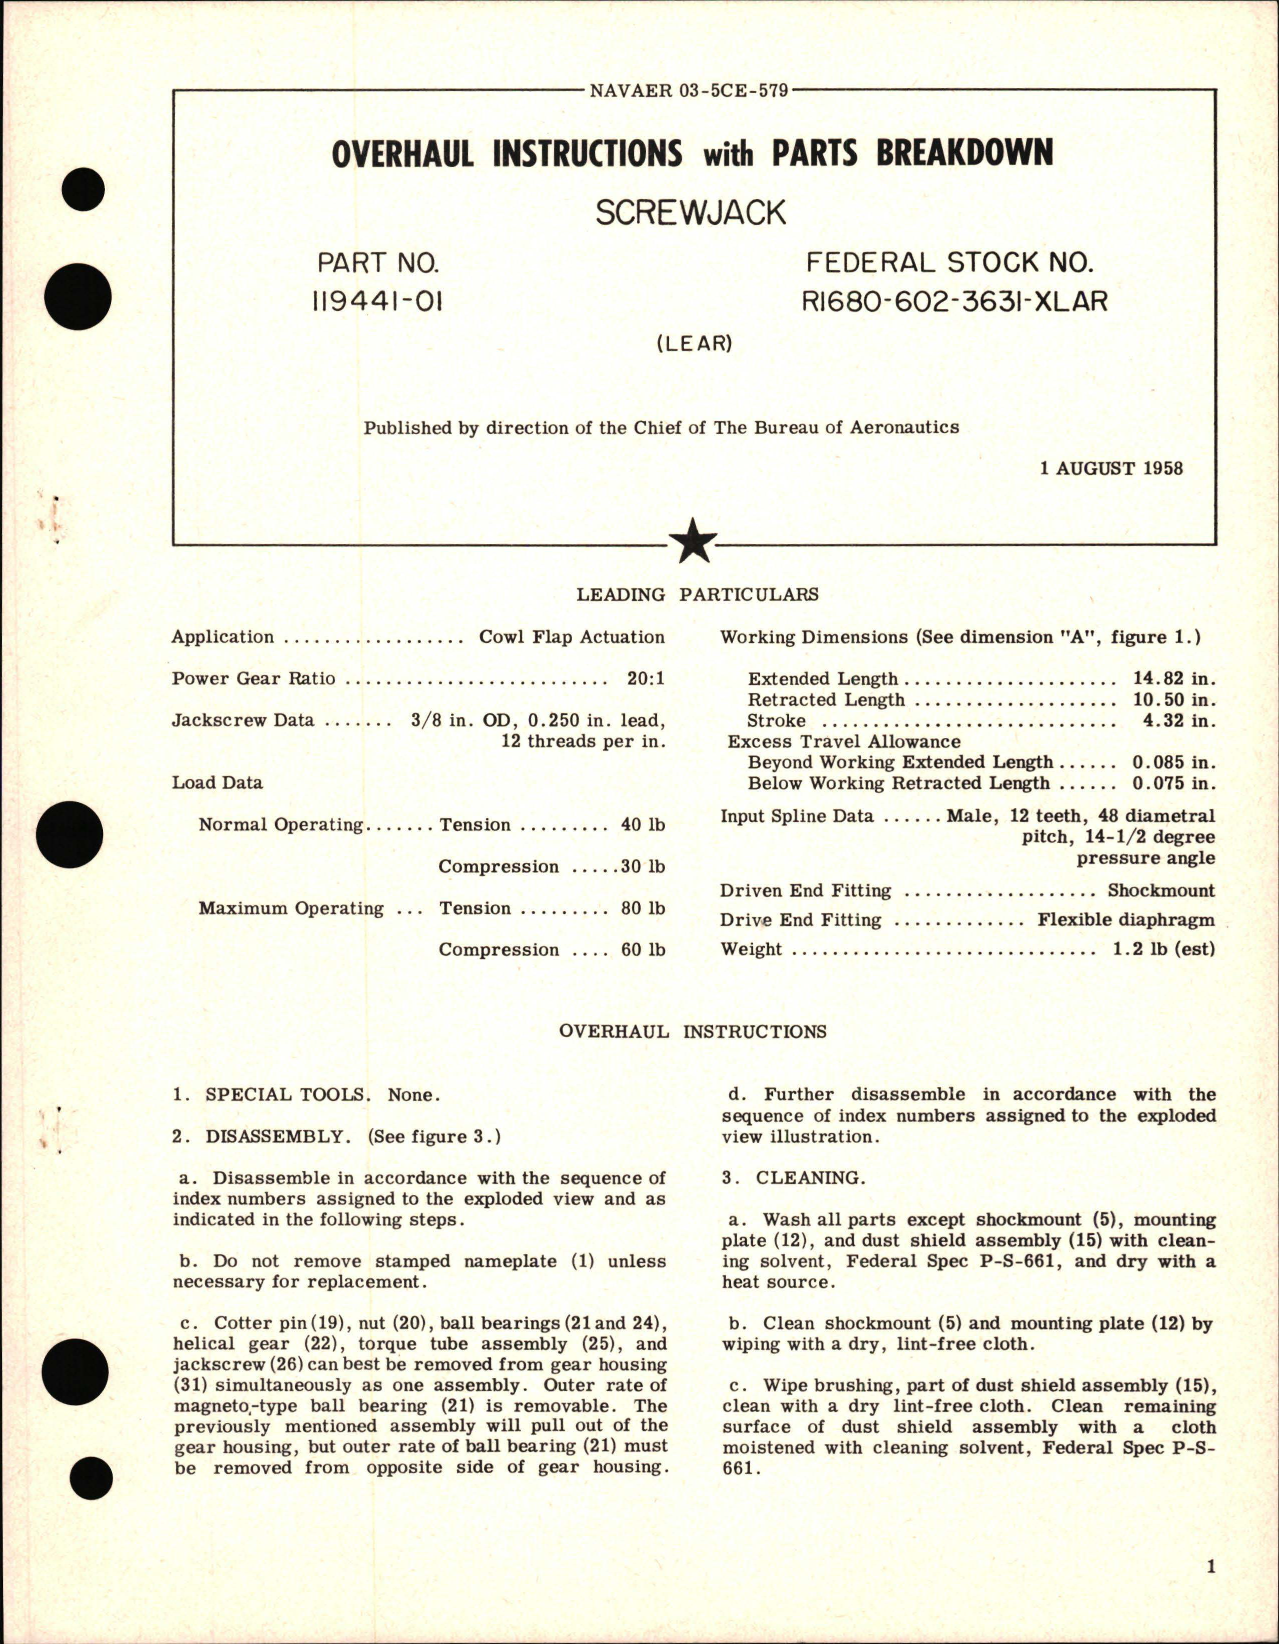 Sample page 1 from AirCorps Library document: Overhaul Instructions with Parts Breakdown for Screwjack - Part 119441-01 